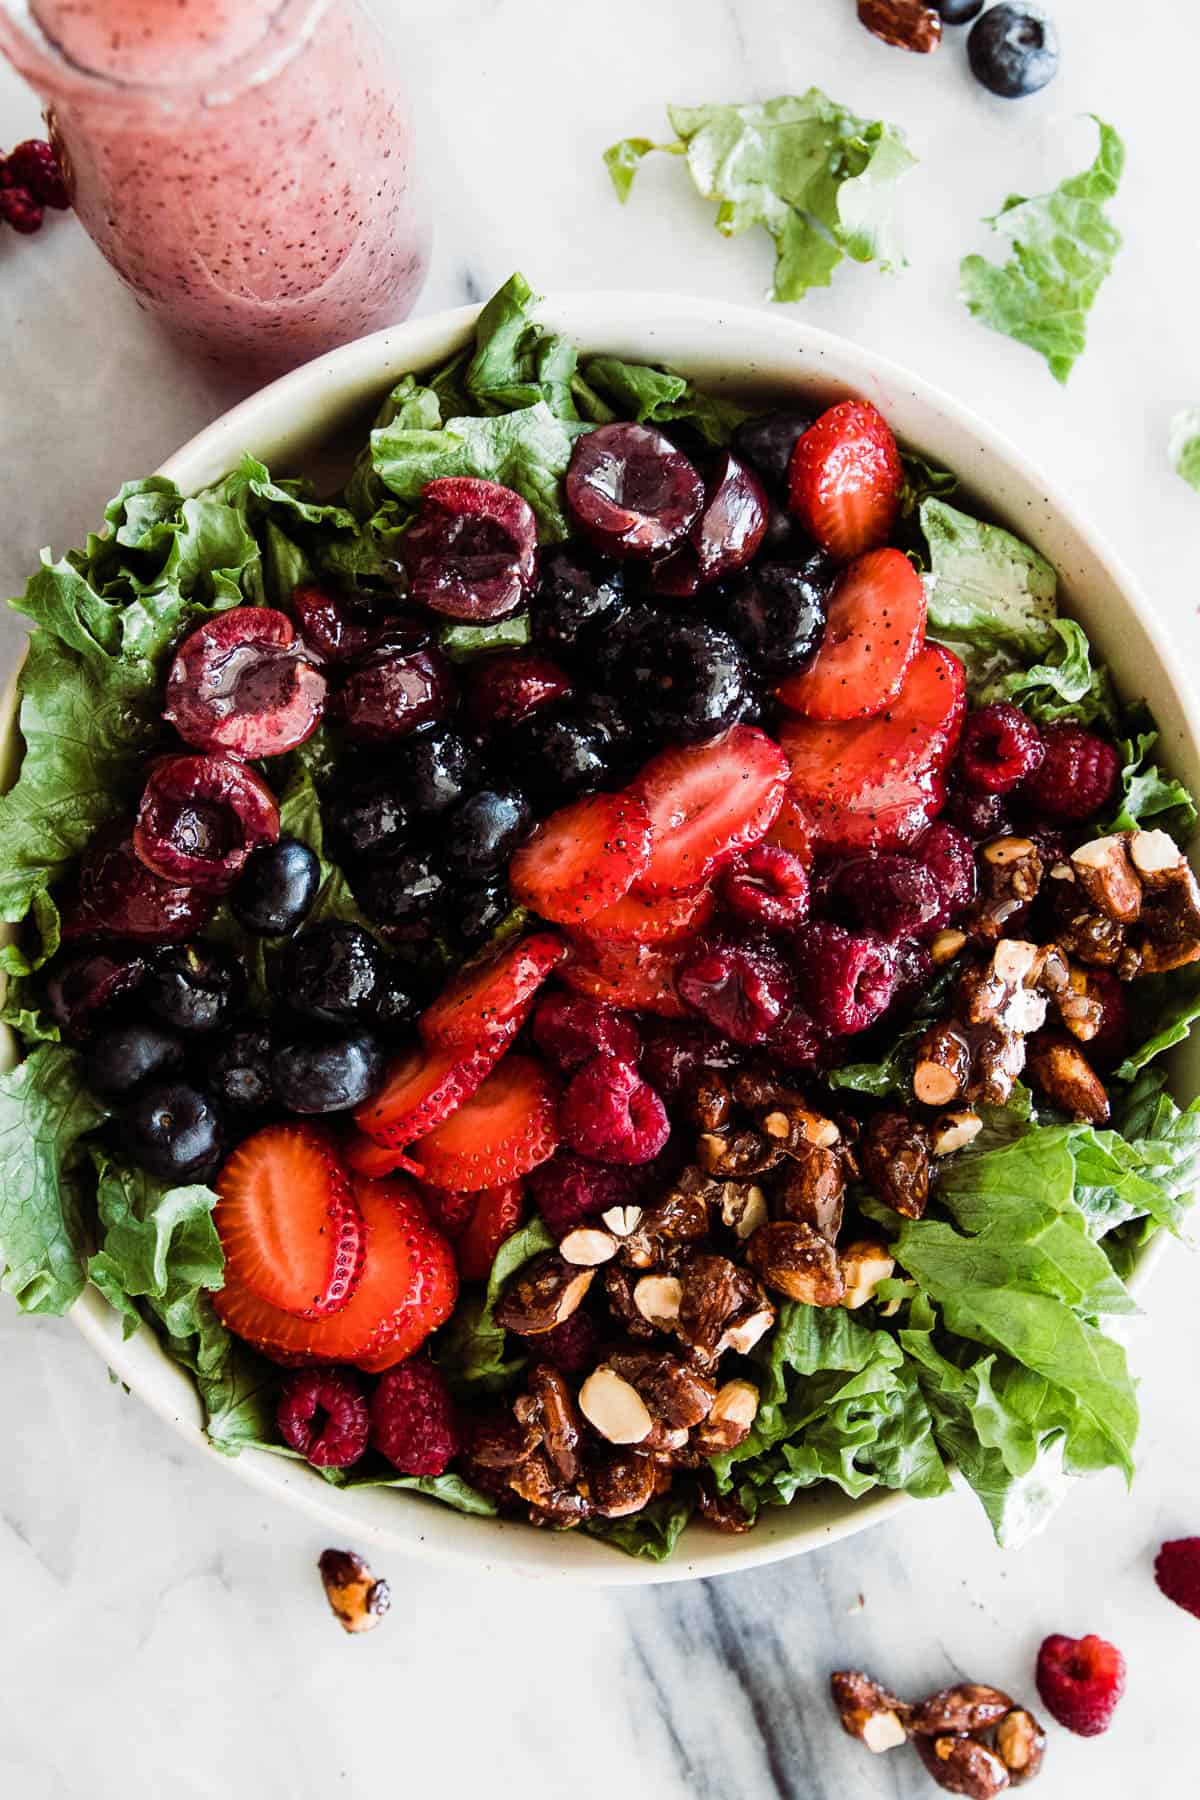 Large bowl of blue berry salad.